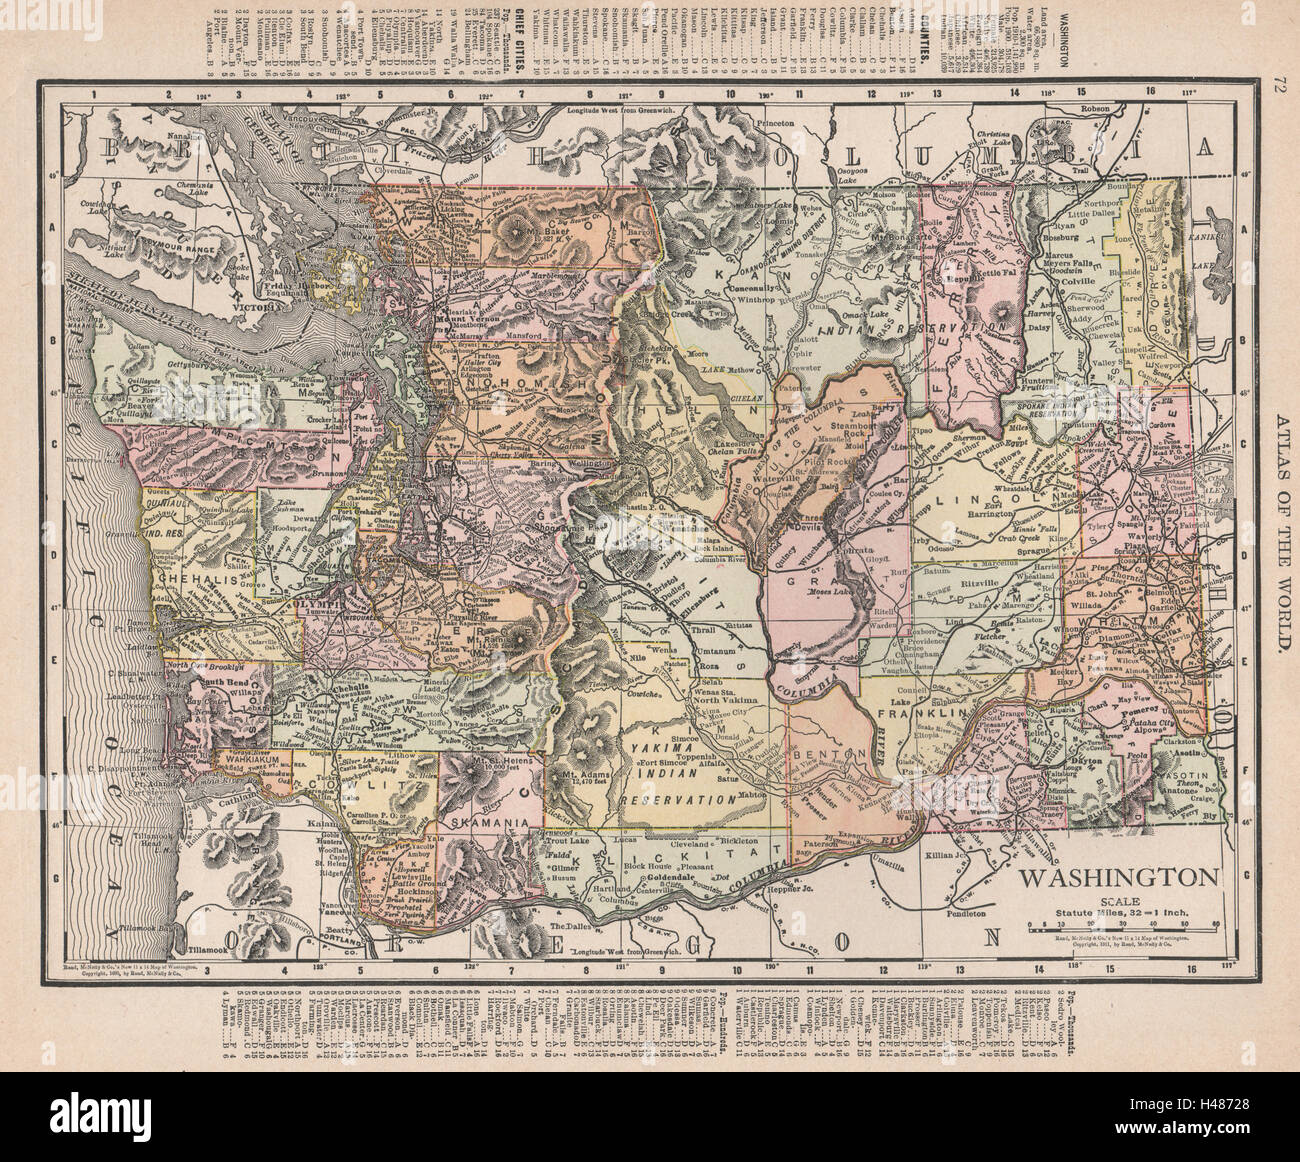 Washington State state map showing counties. RAND MCNALLY 1912 old antique Stock Photo